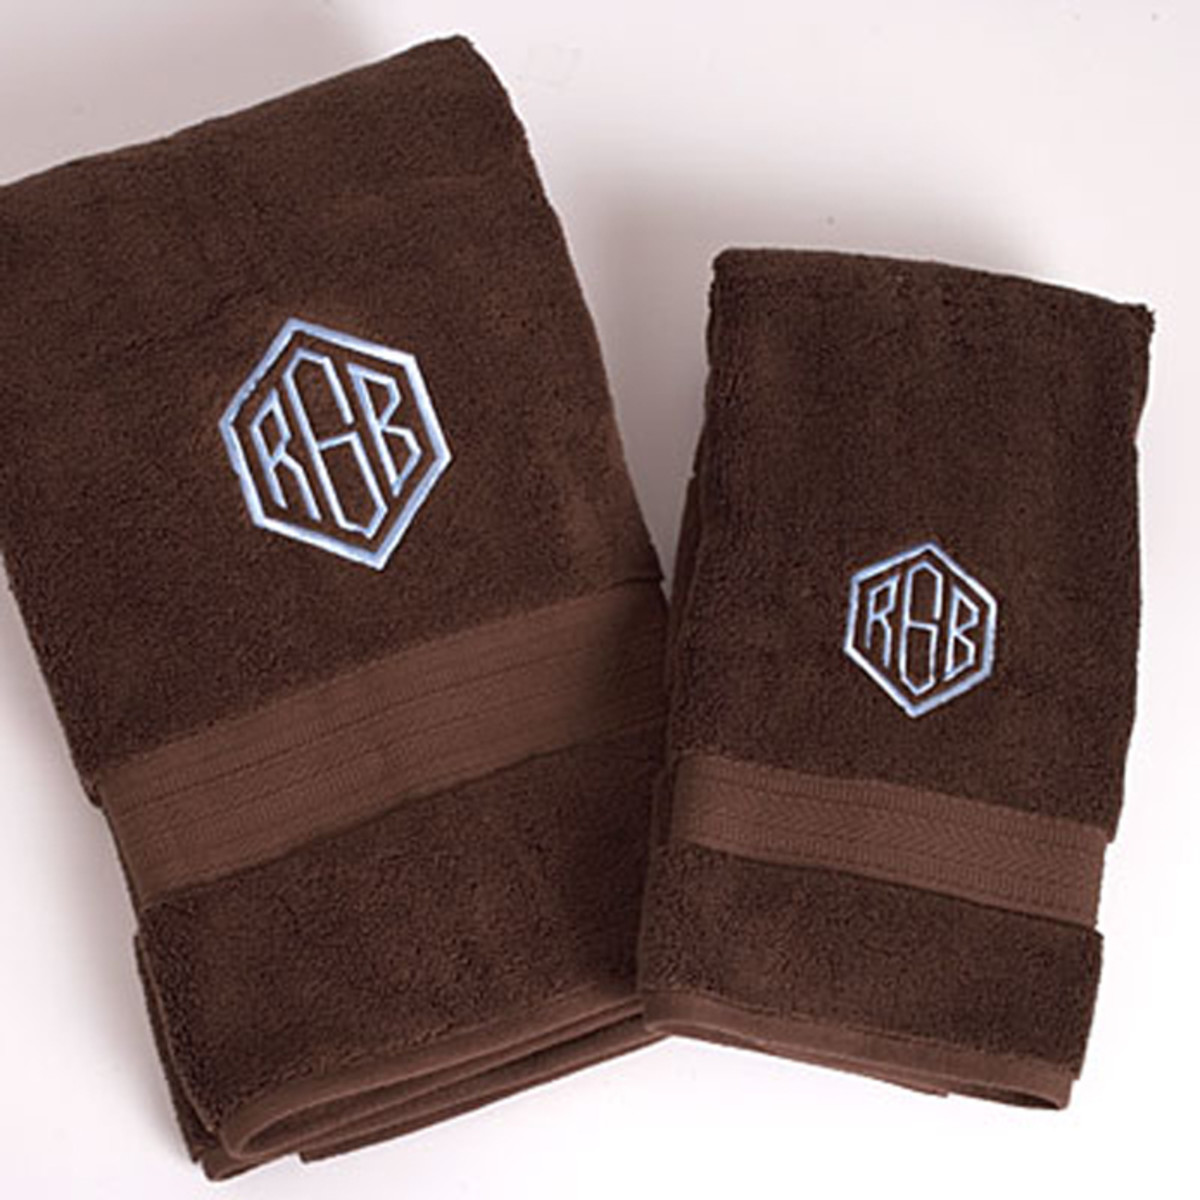 Monogrammed towels are a great gift for newlyweds.